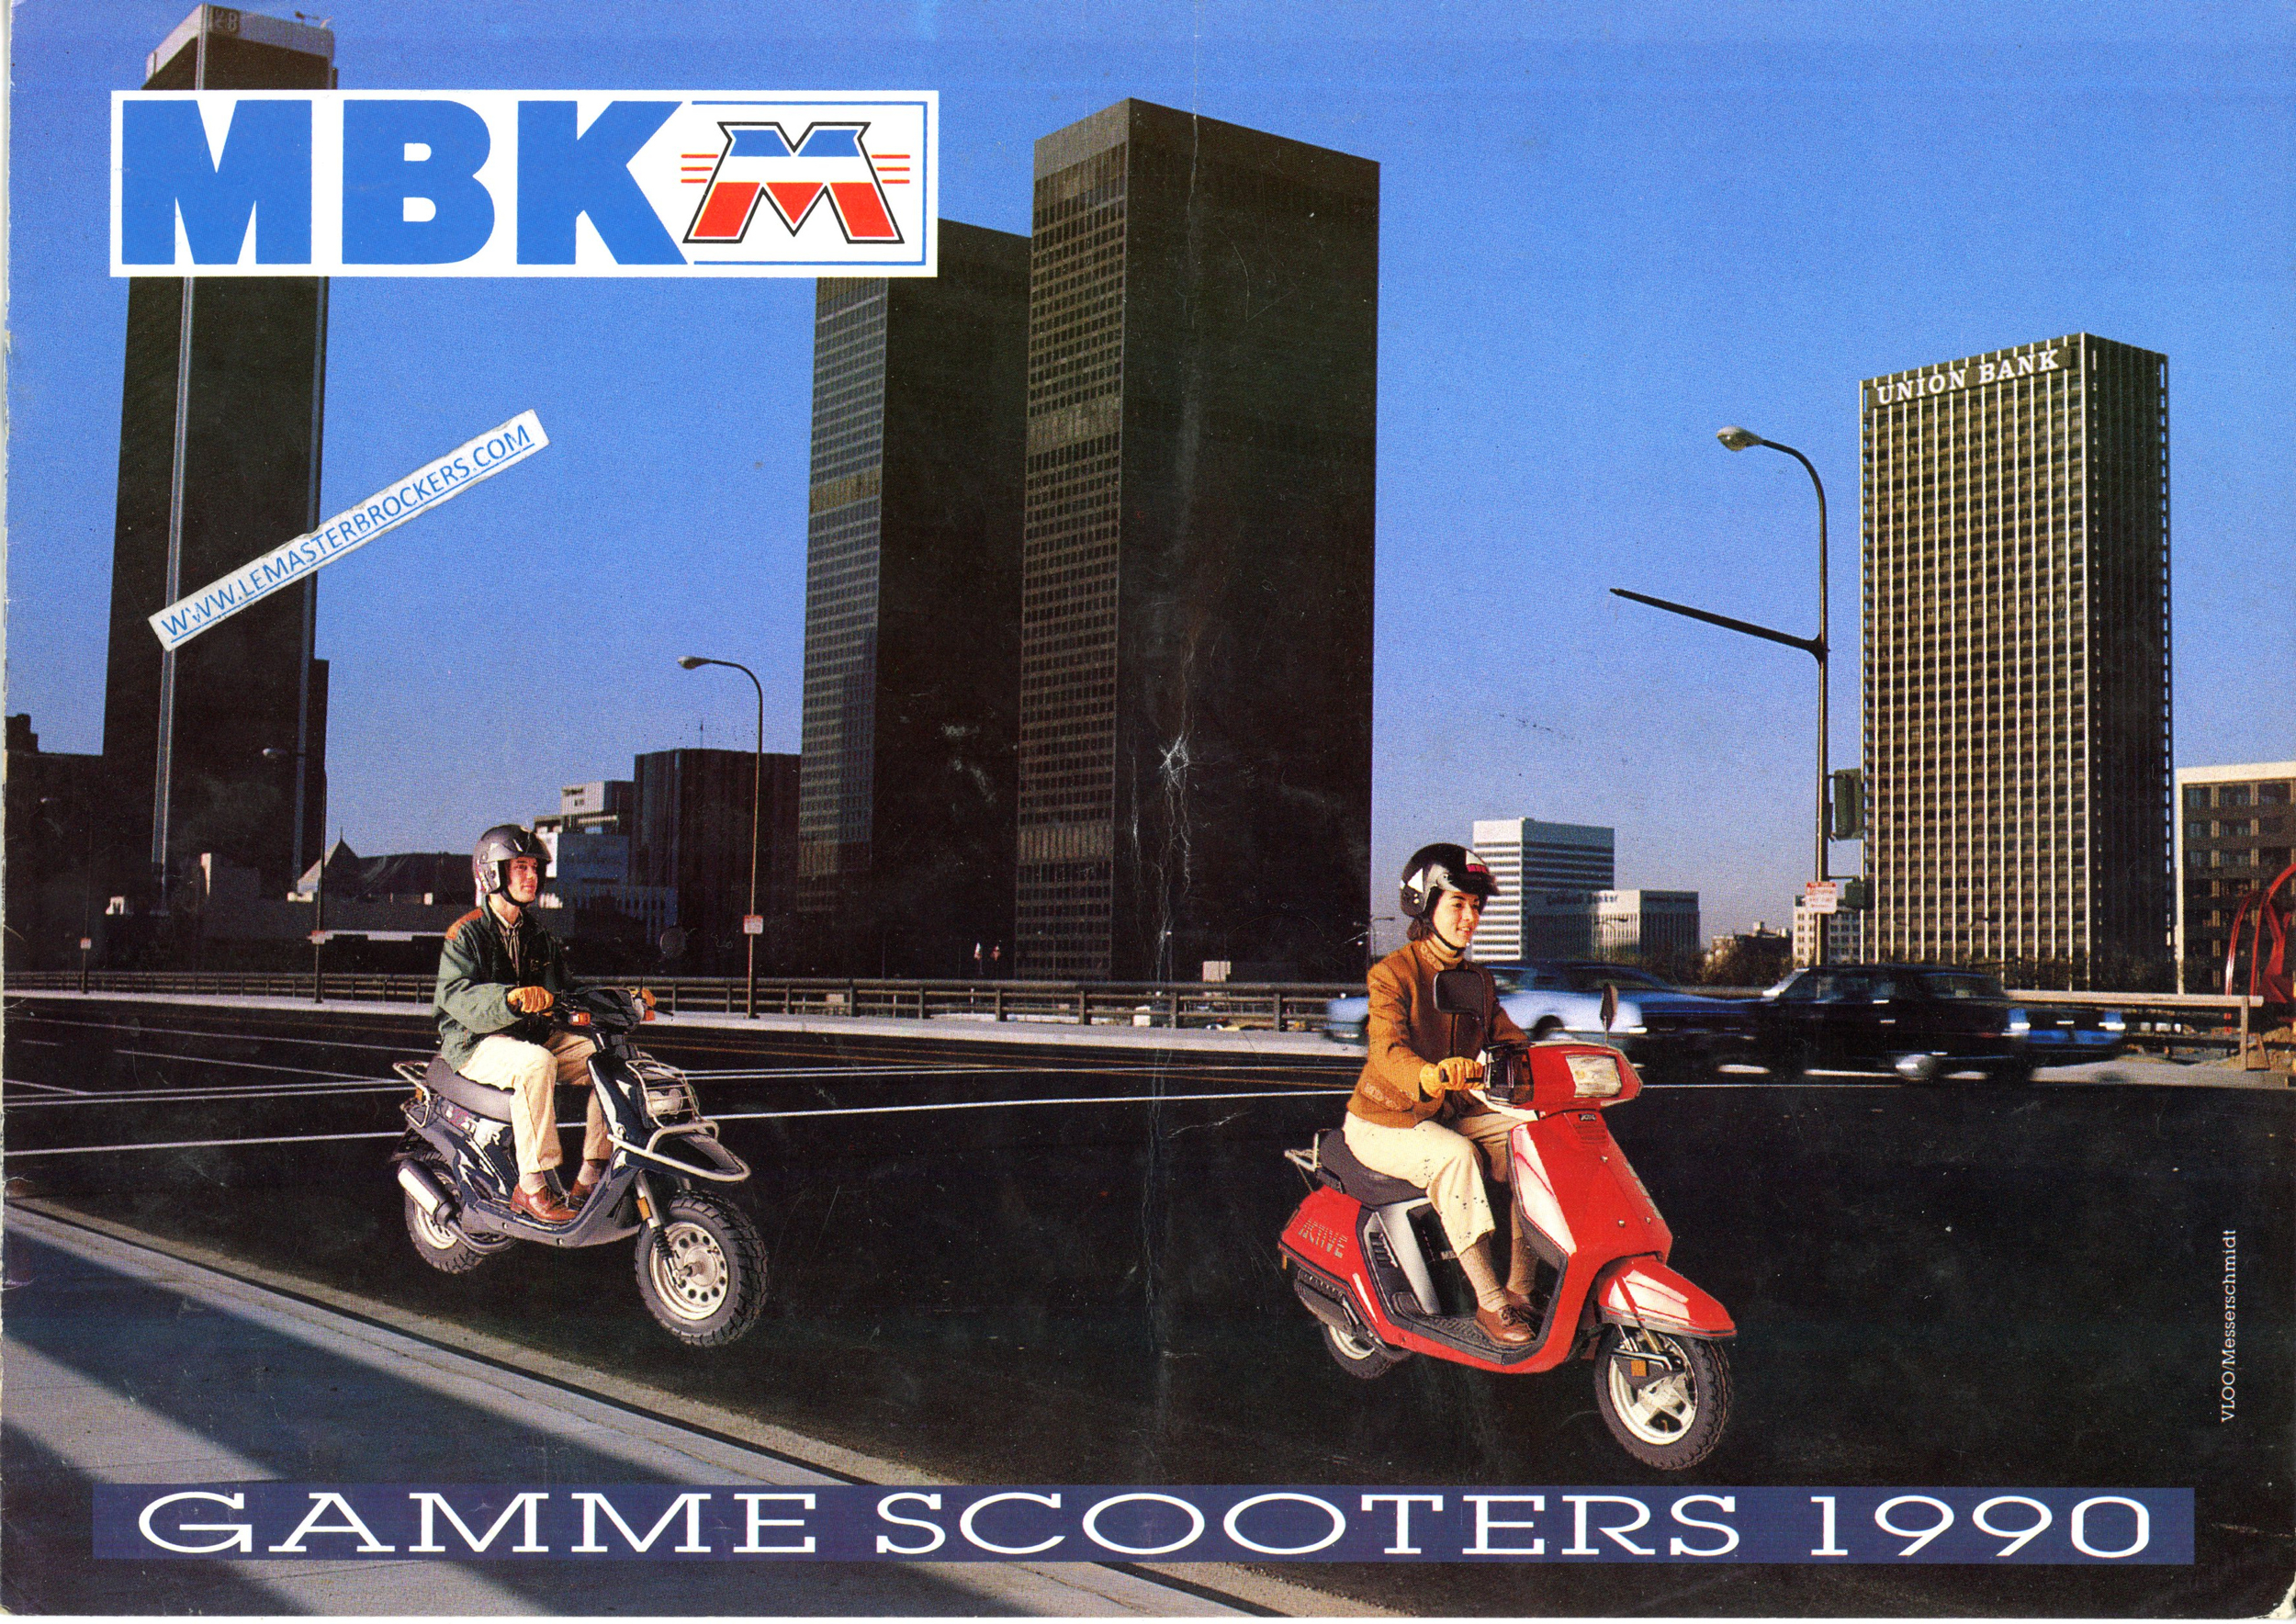 MBK GAMME SCOOTERS 1990 BOOSTER ACTIVE CAMP BROCHURE CATALOGUE